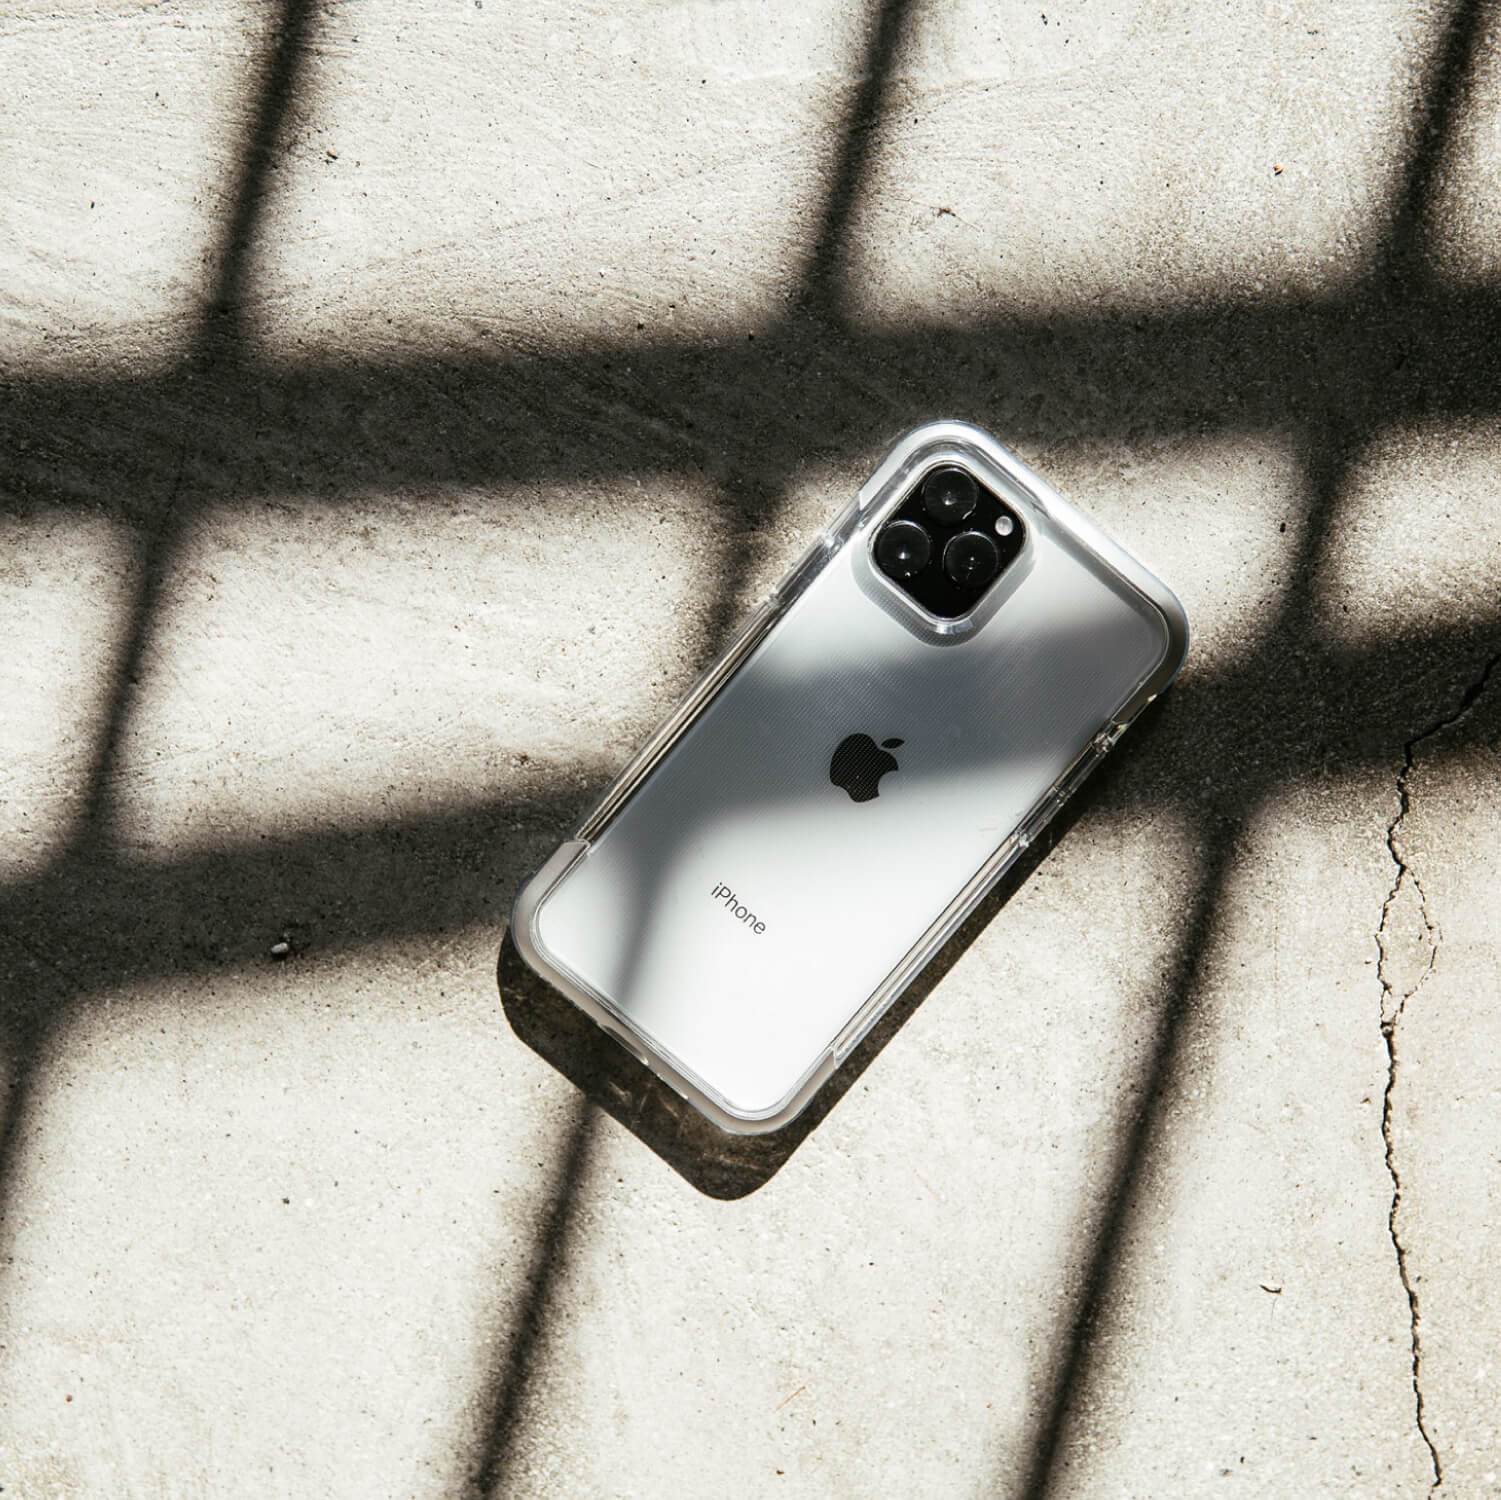 A white iPhone 11 Case - AIR by Raptic is laying on a concrete floor.